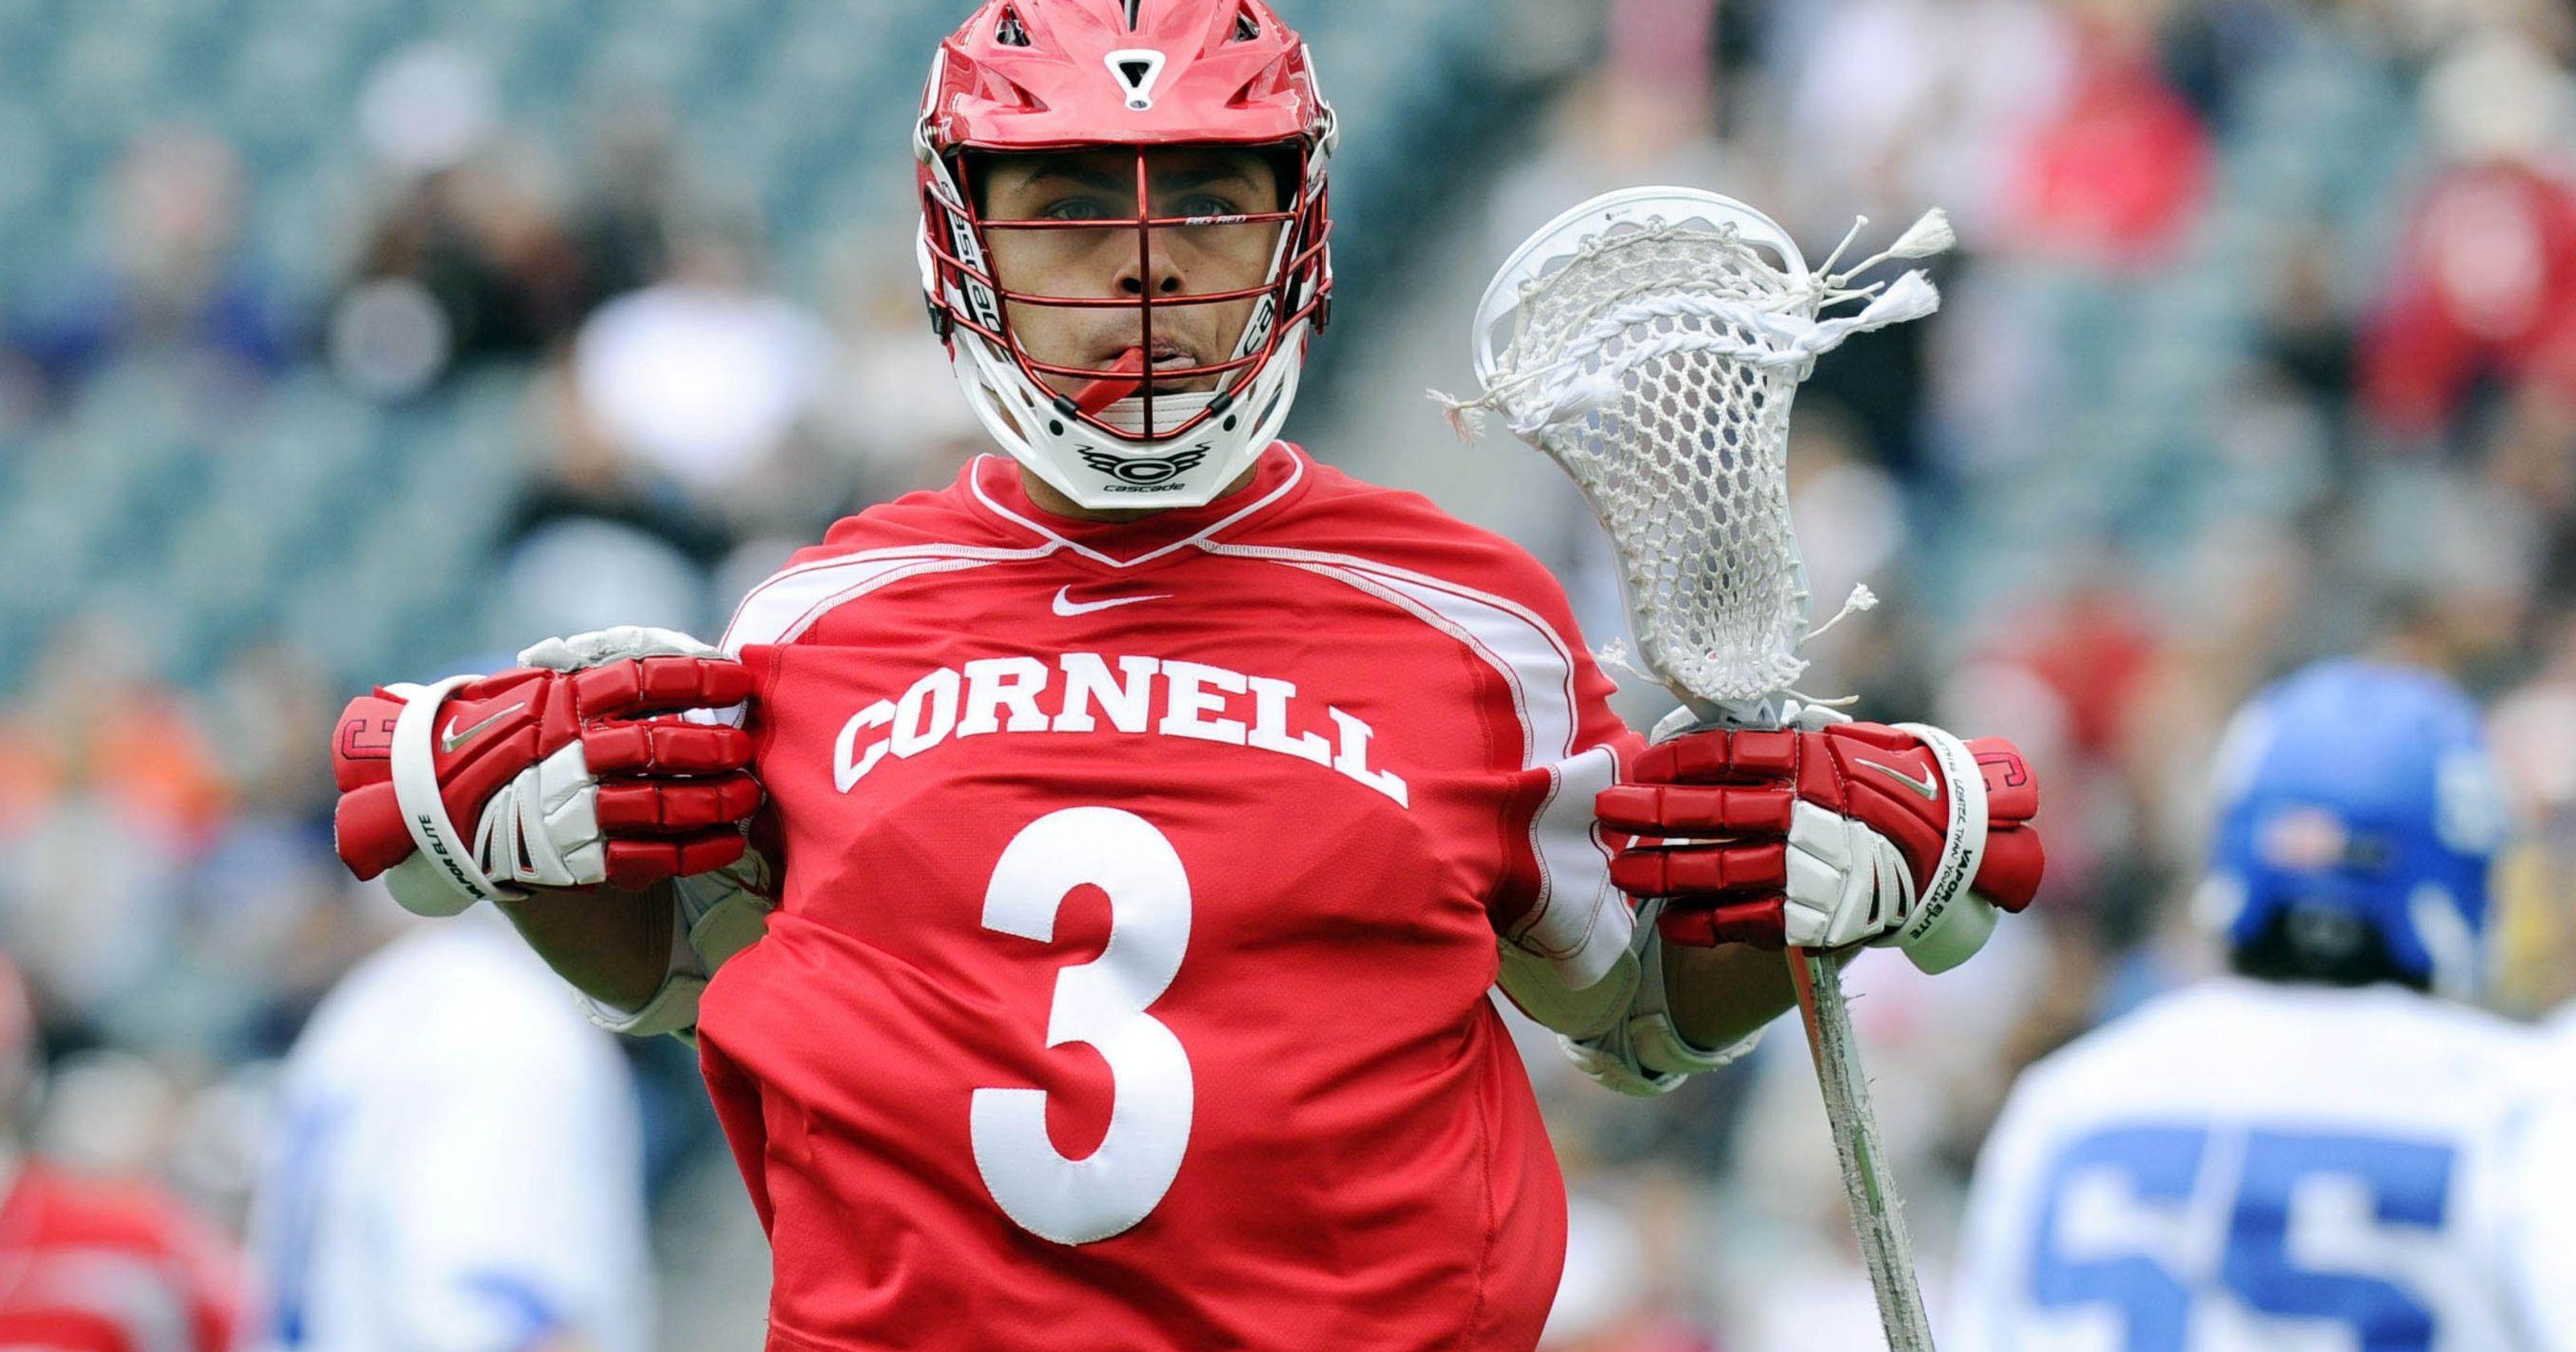 Cornell Lacrosse Logo - Cornell lacrosse hazing involved forcing players to chug beer